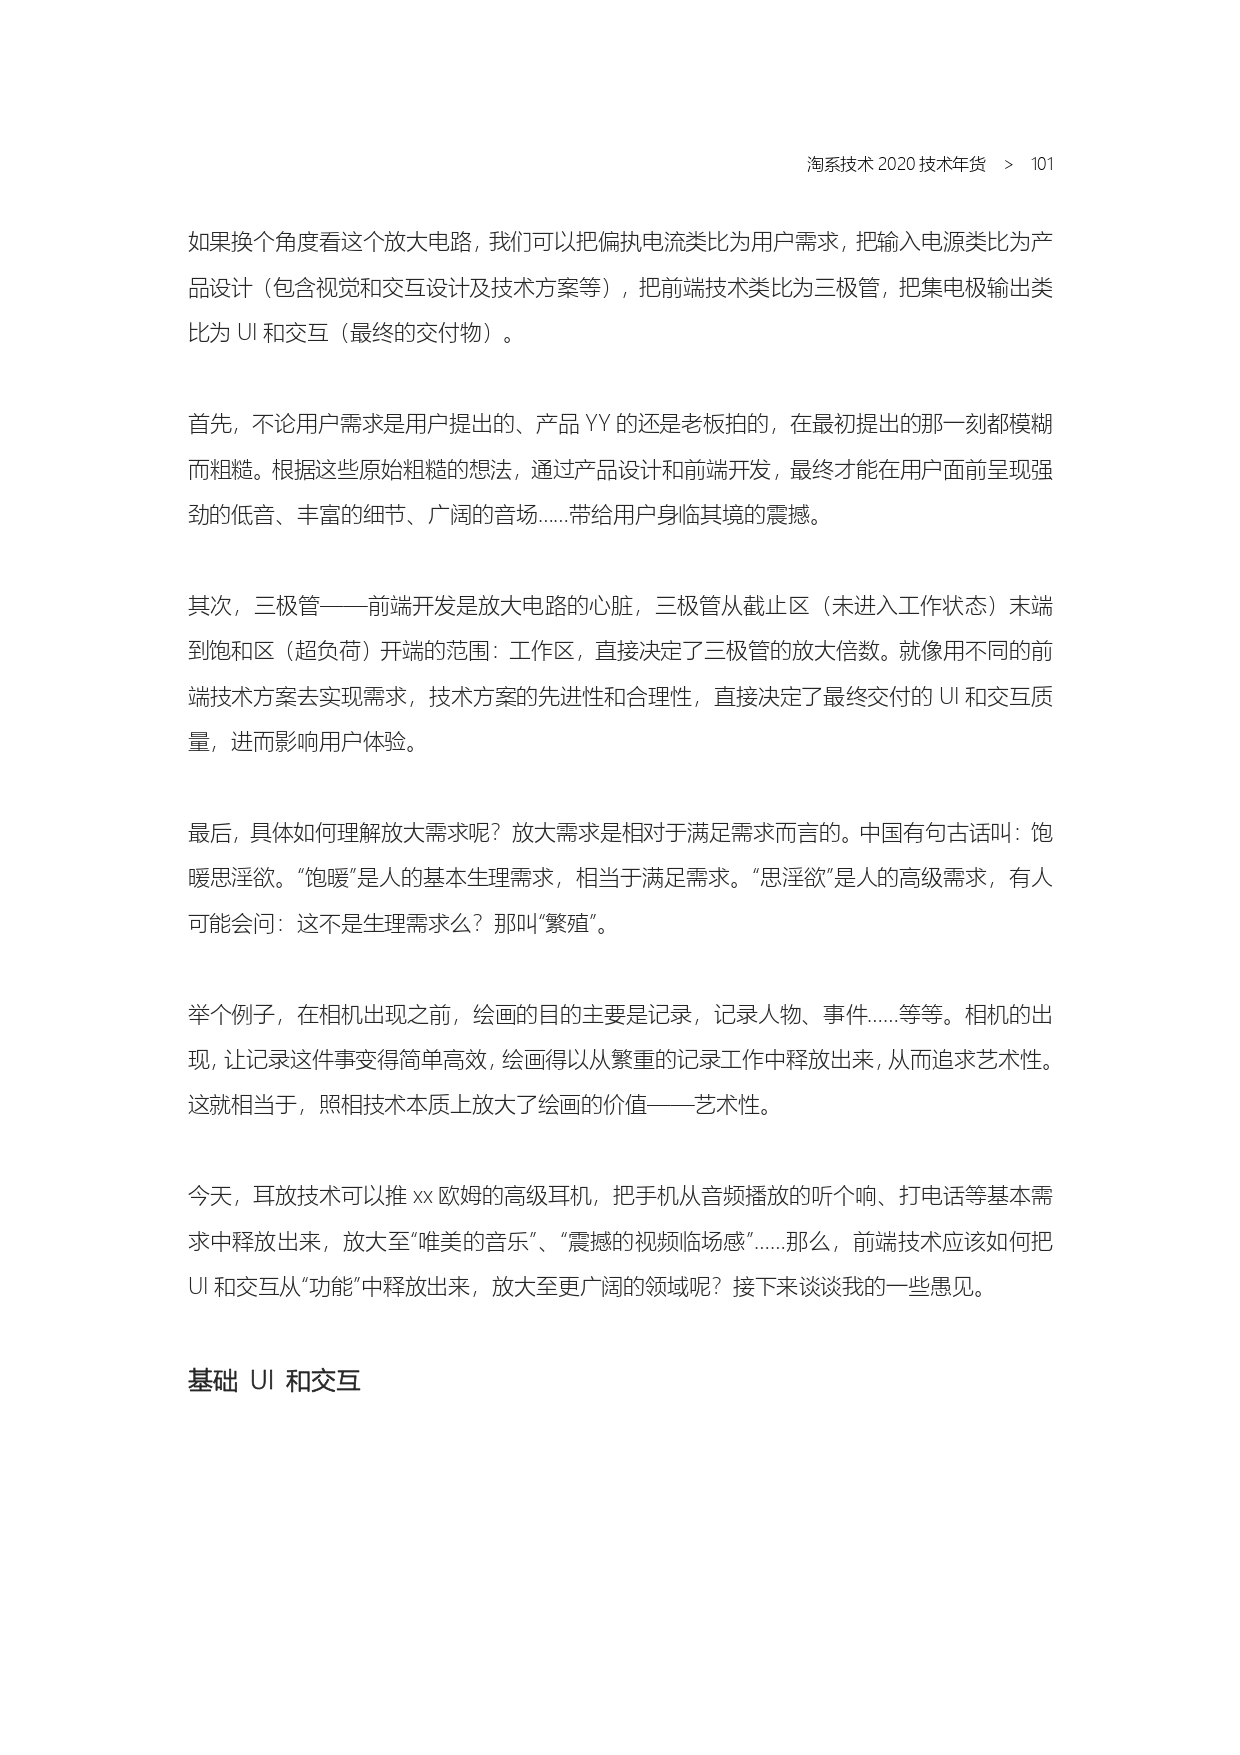 The Complete Works of Tao Technology 2020-1-570_page-0101.jpg